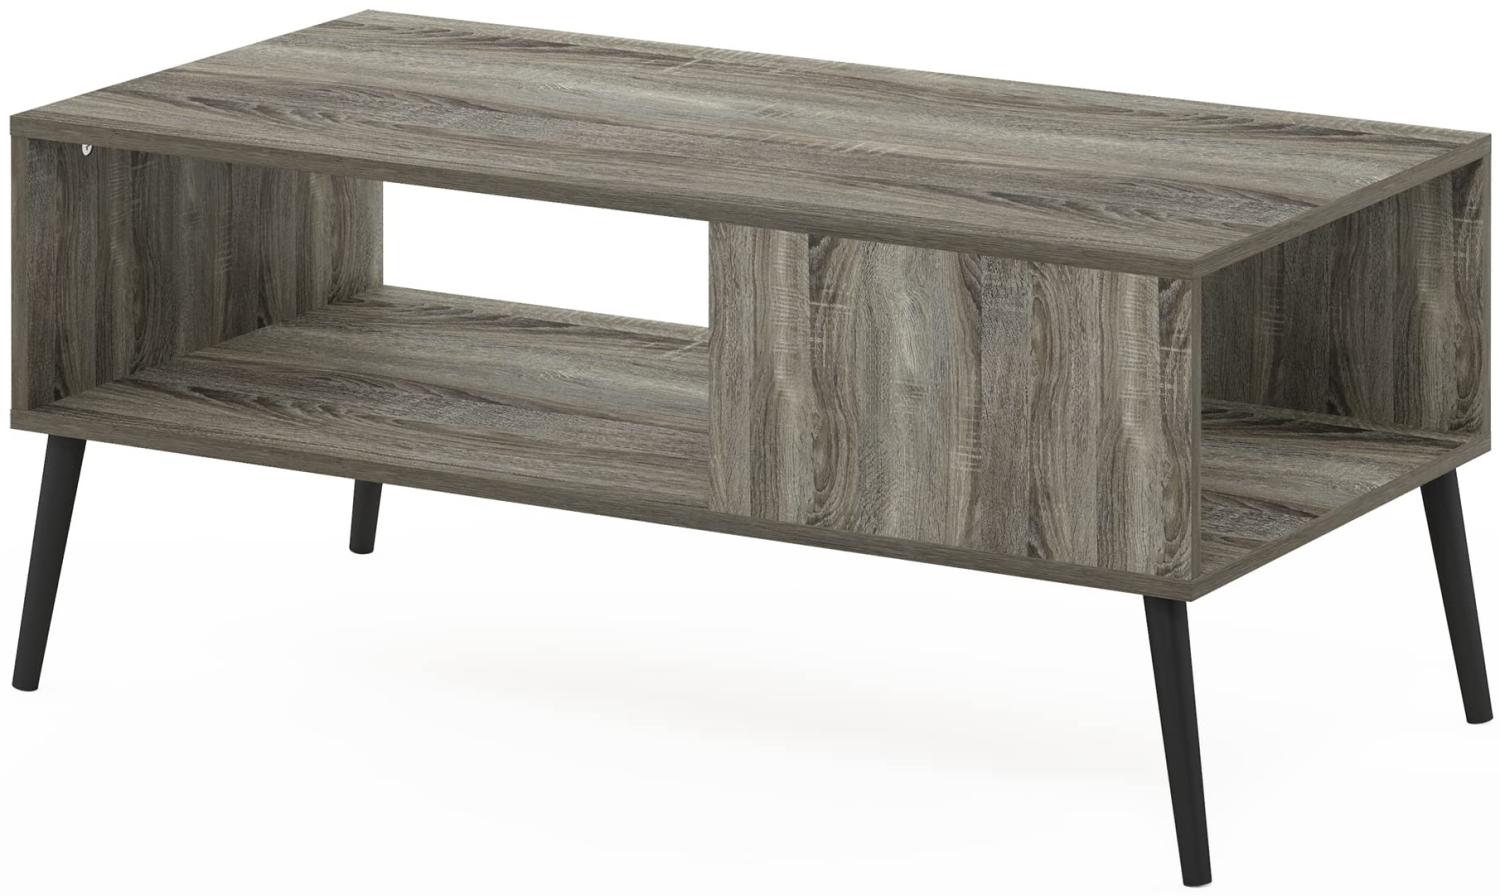 Furinno Mid Century Style Coffee Table with Wood Legs, Engineered, French Oak, 50. 01 (D) x 100 (W) x 45. 01 (H) cm Bild 1